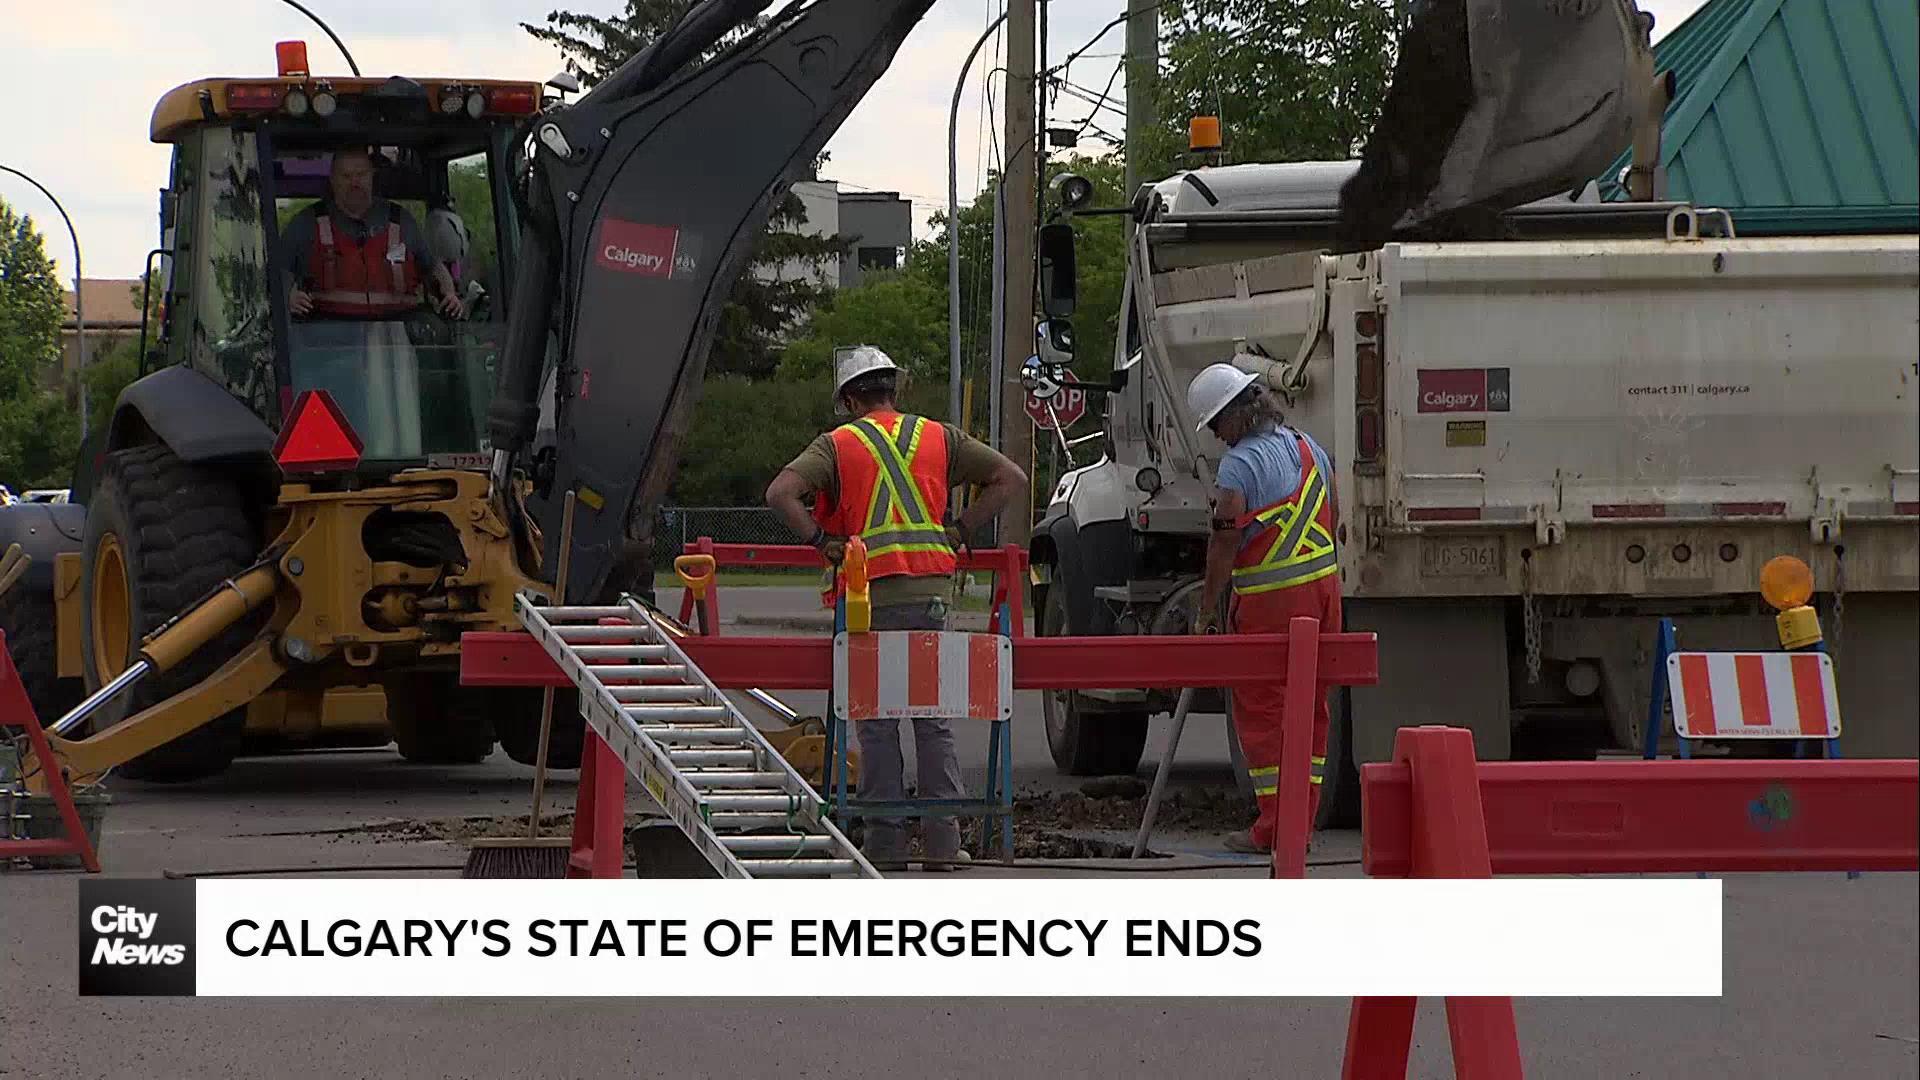 Calgary's state of emergency ends